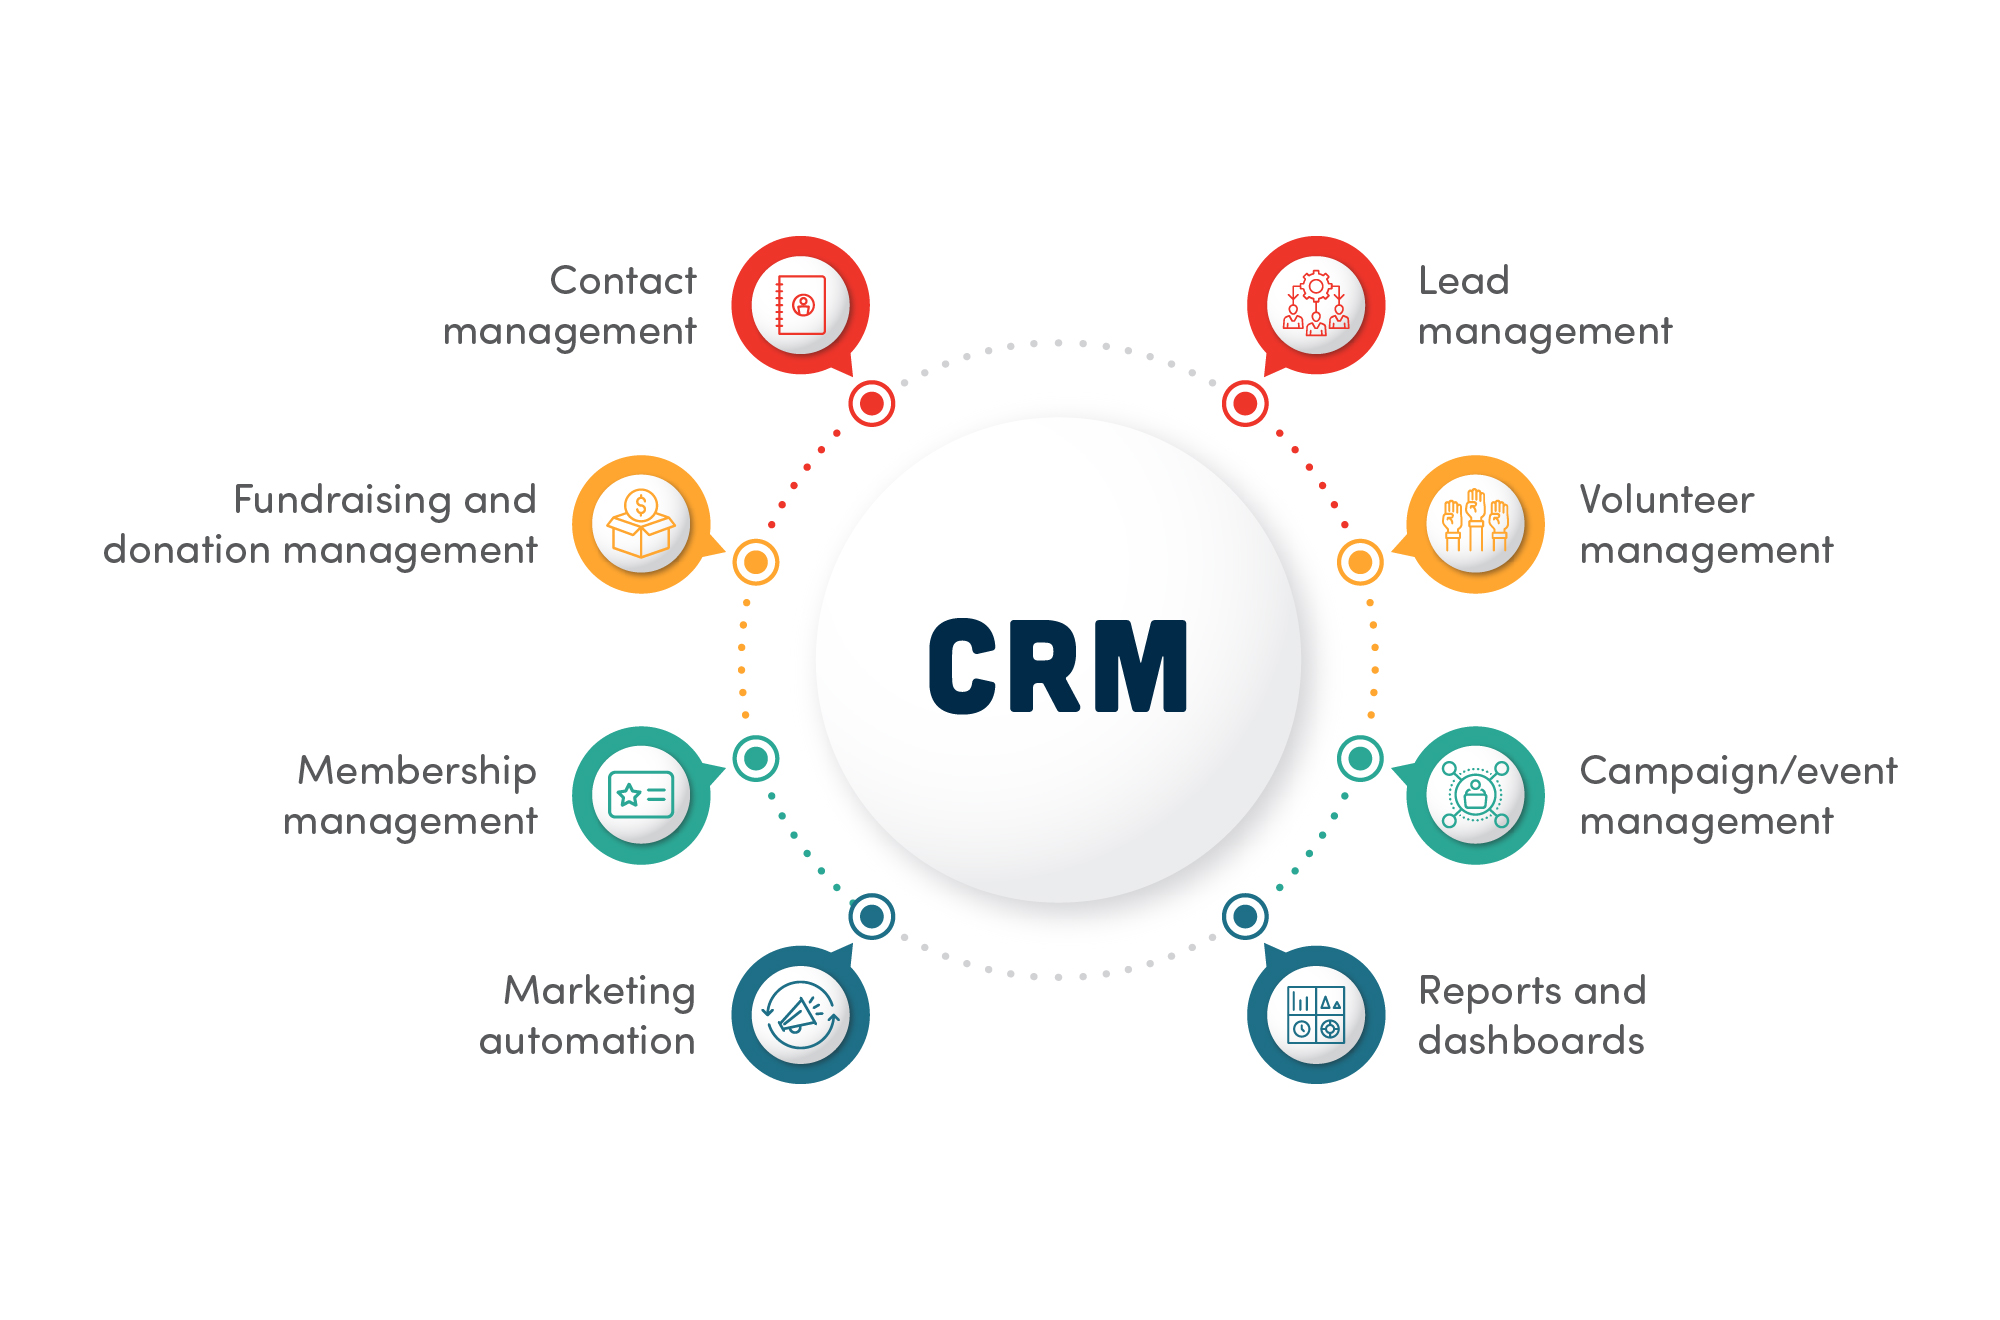 What is a constituent relationship management (CRM) system?